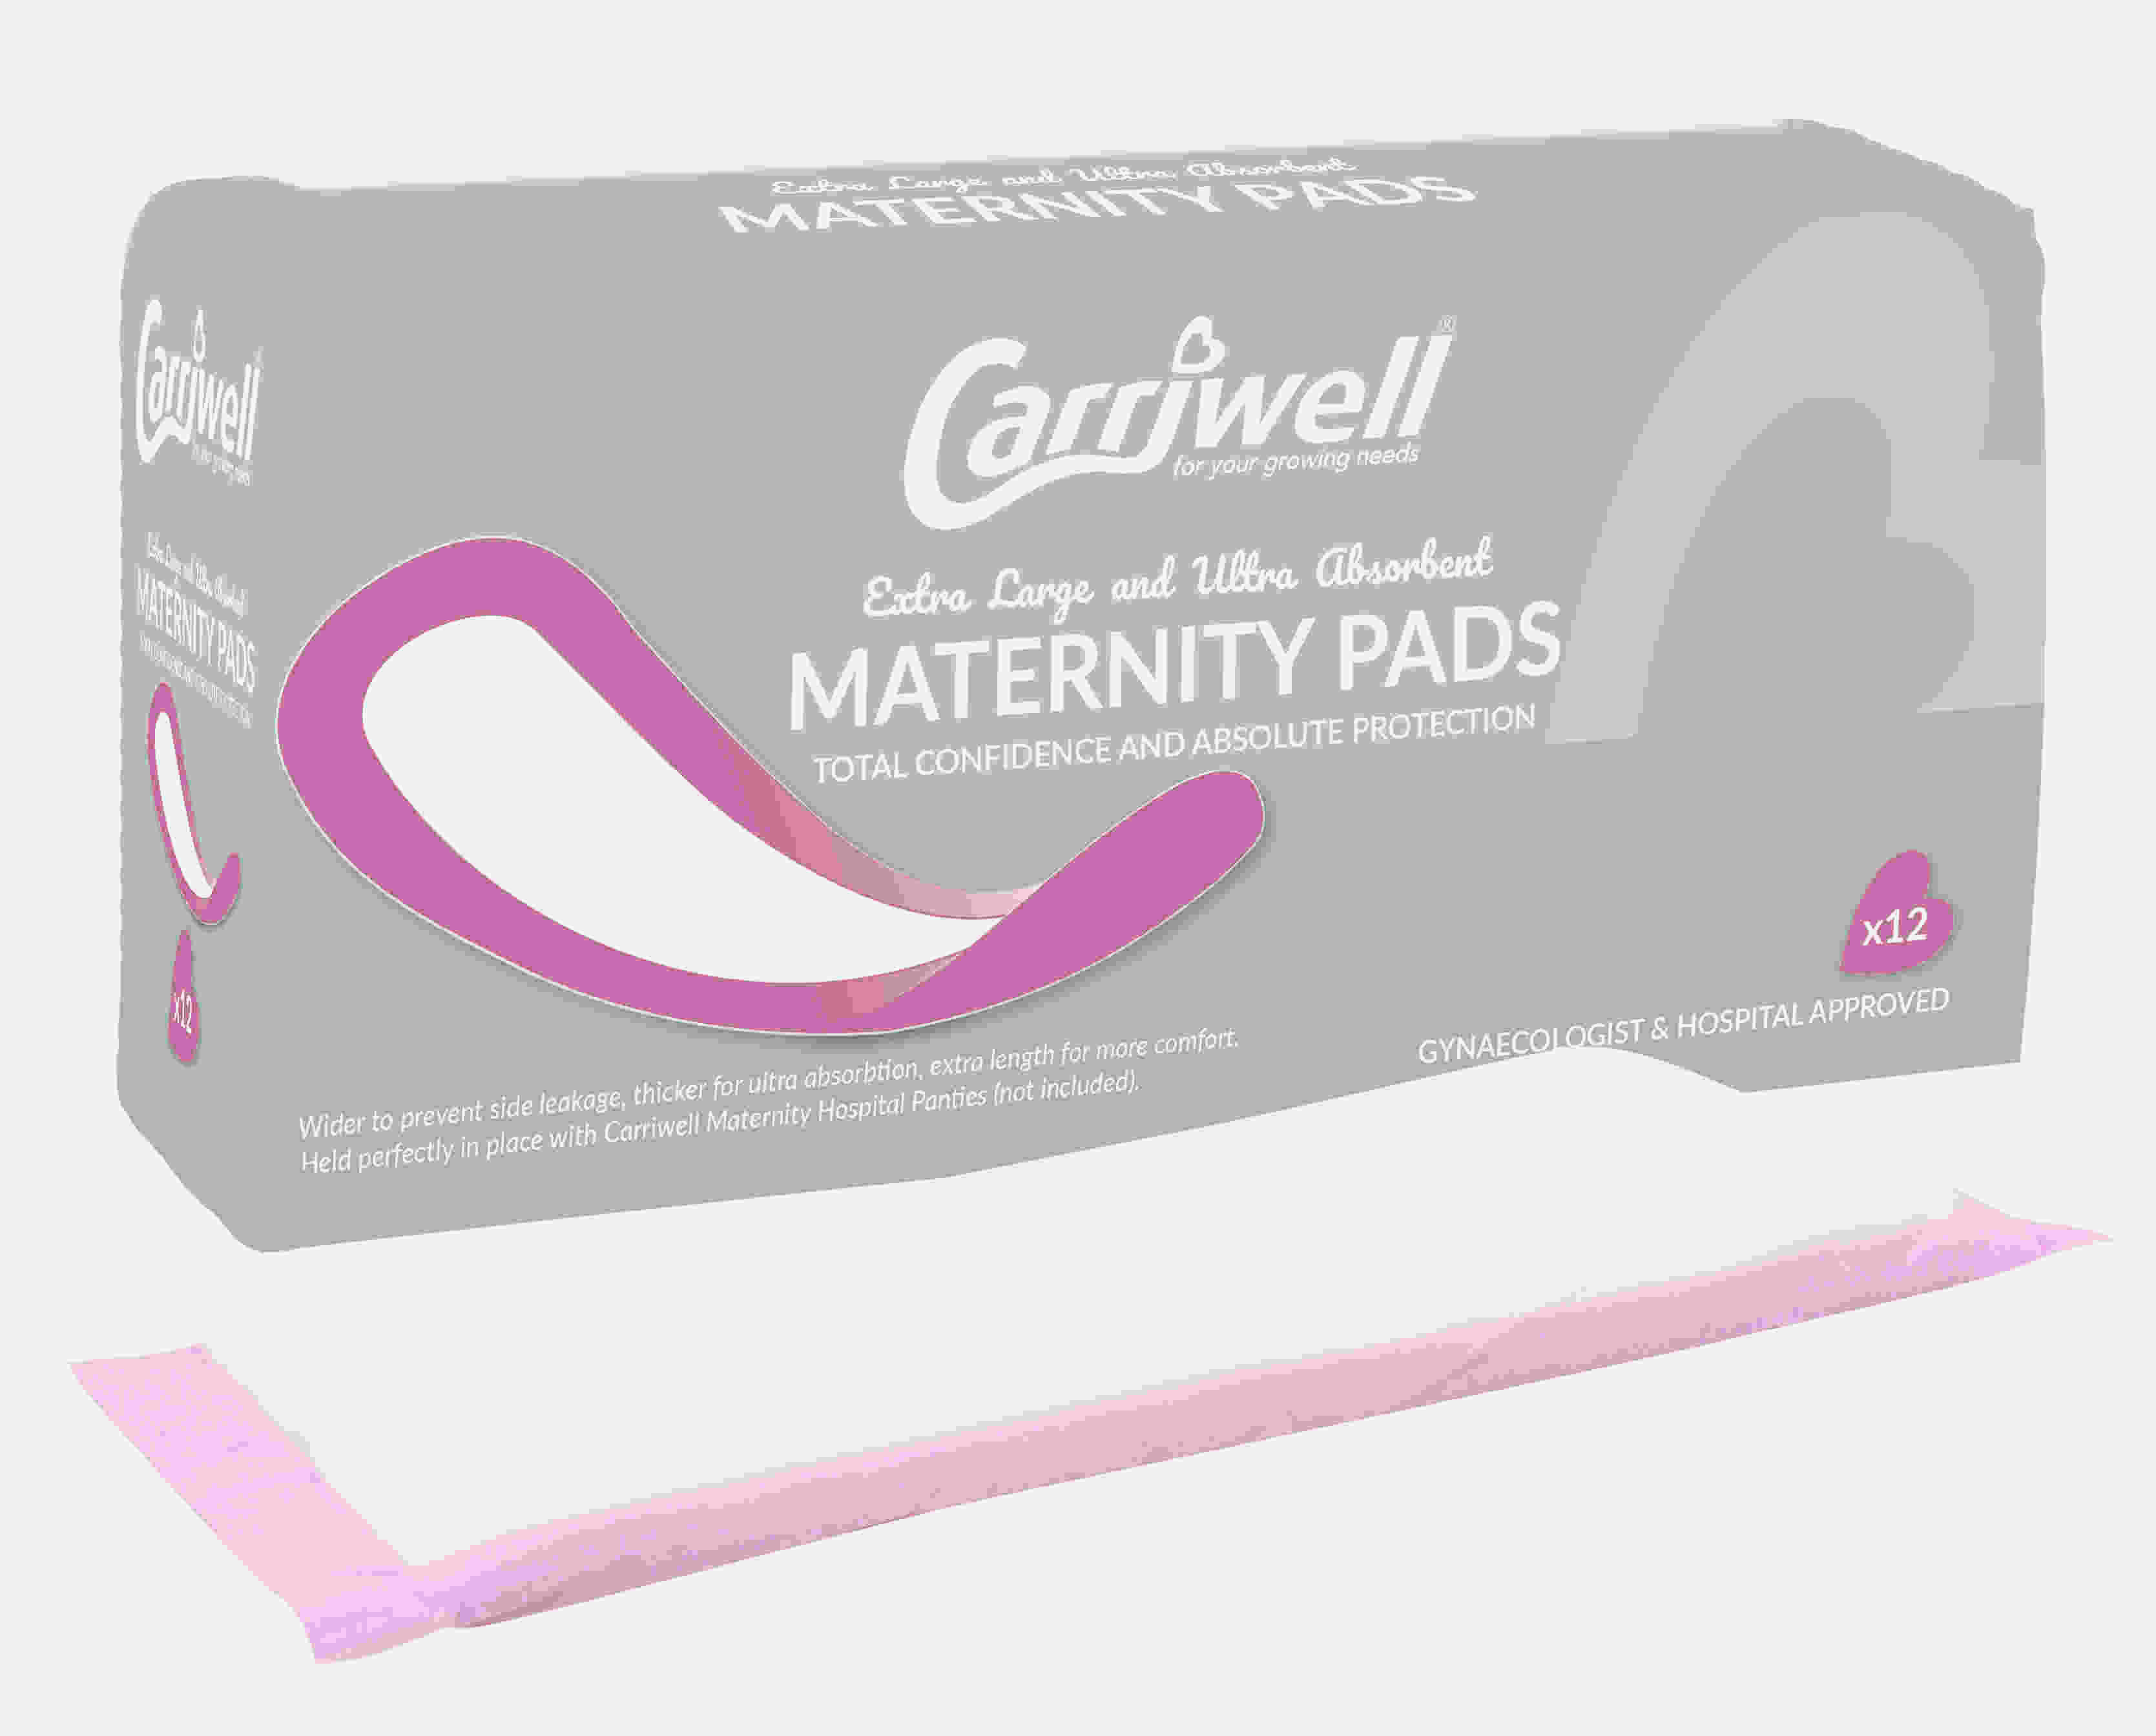 Carriwell maternity pads